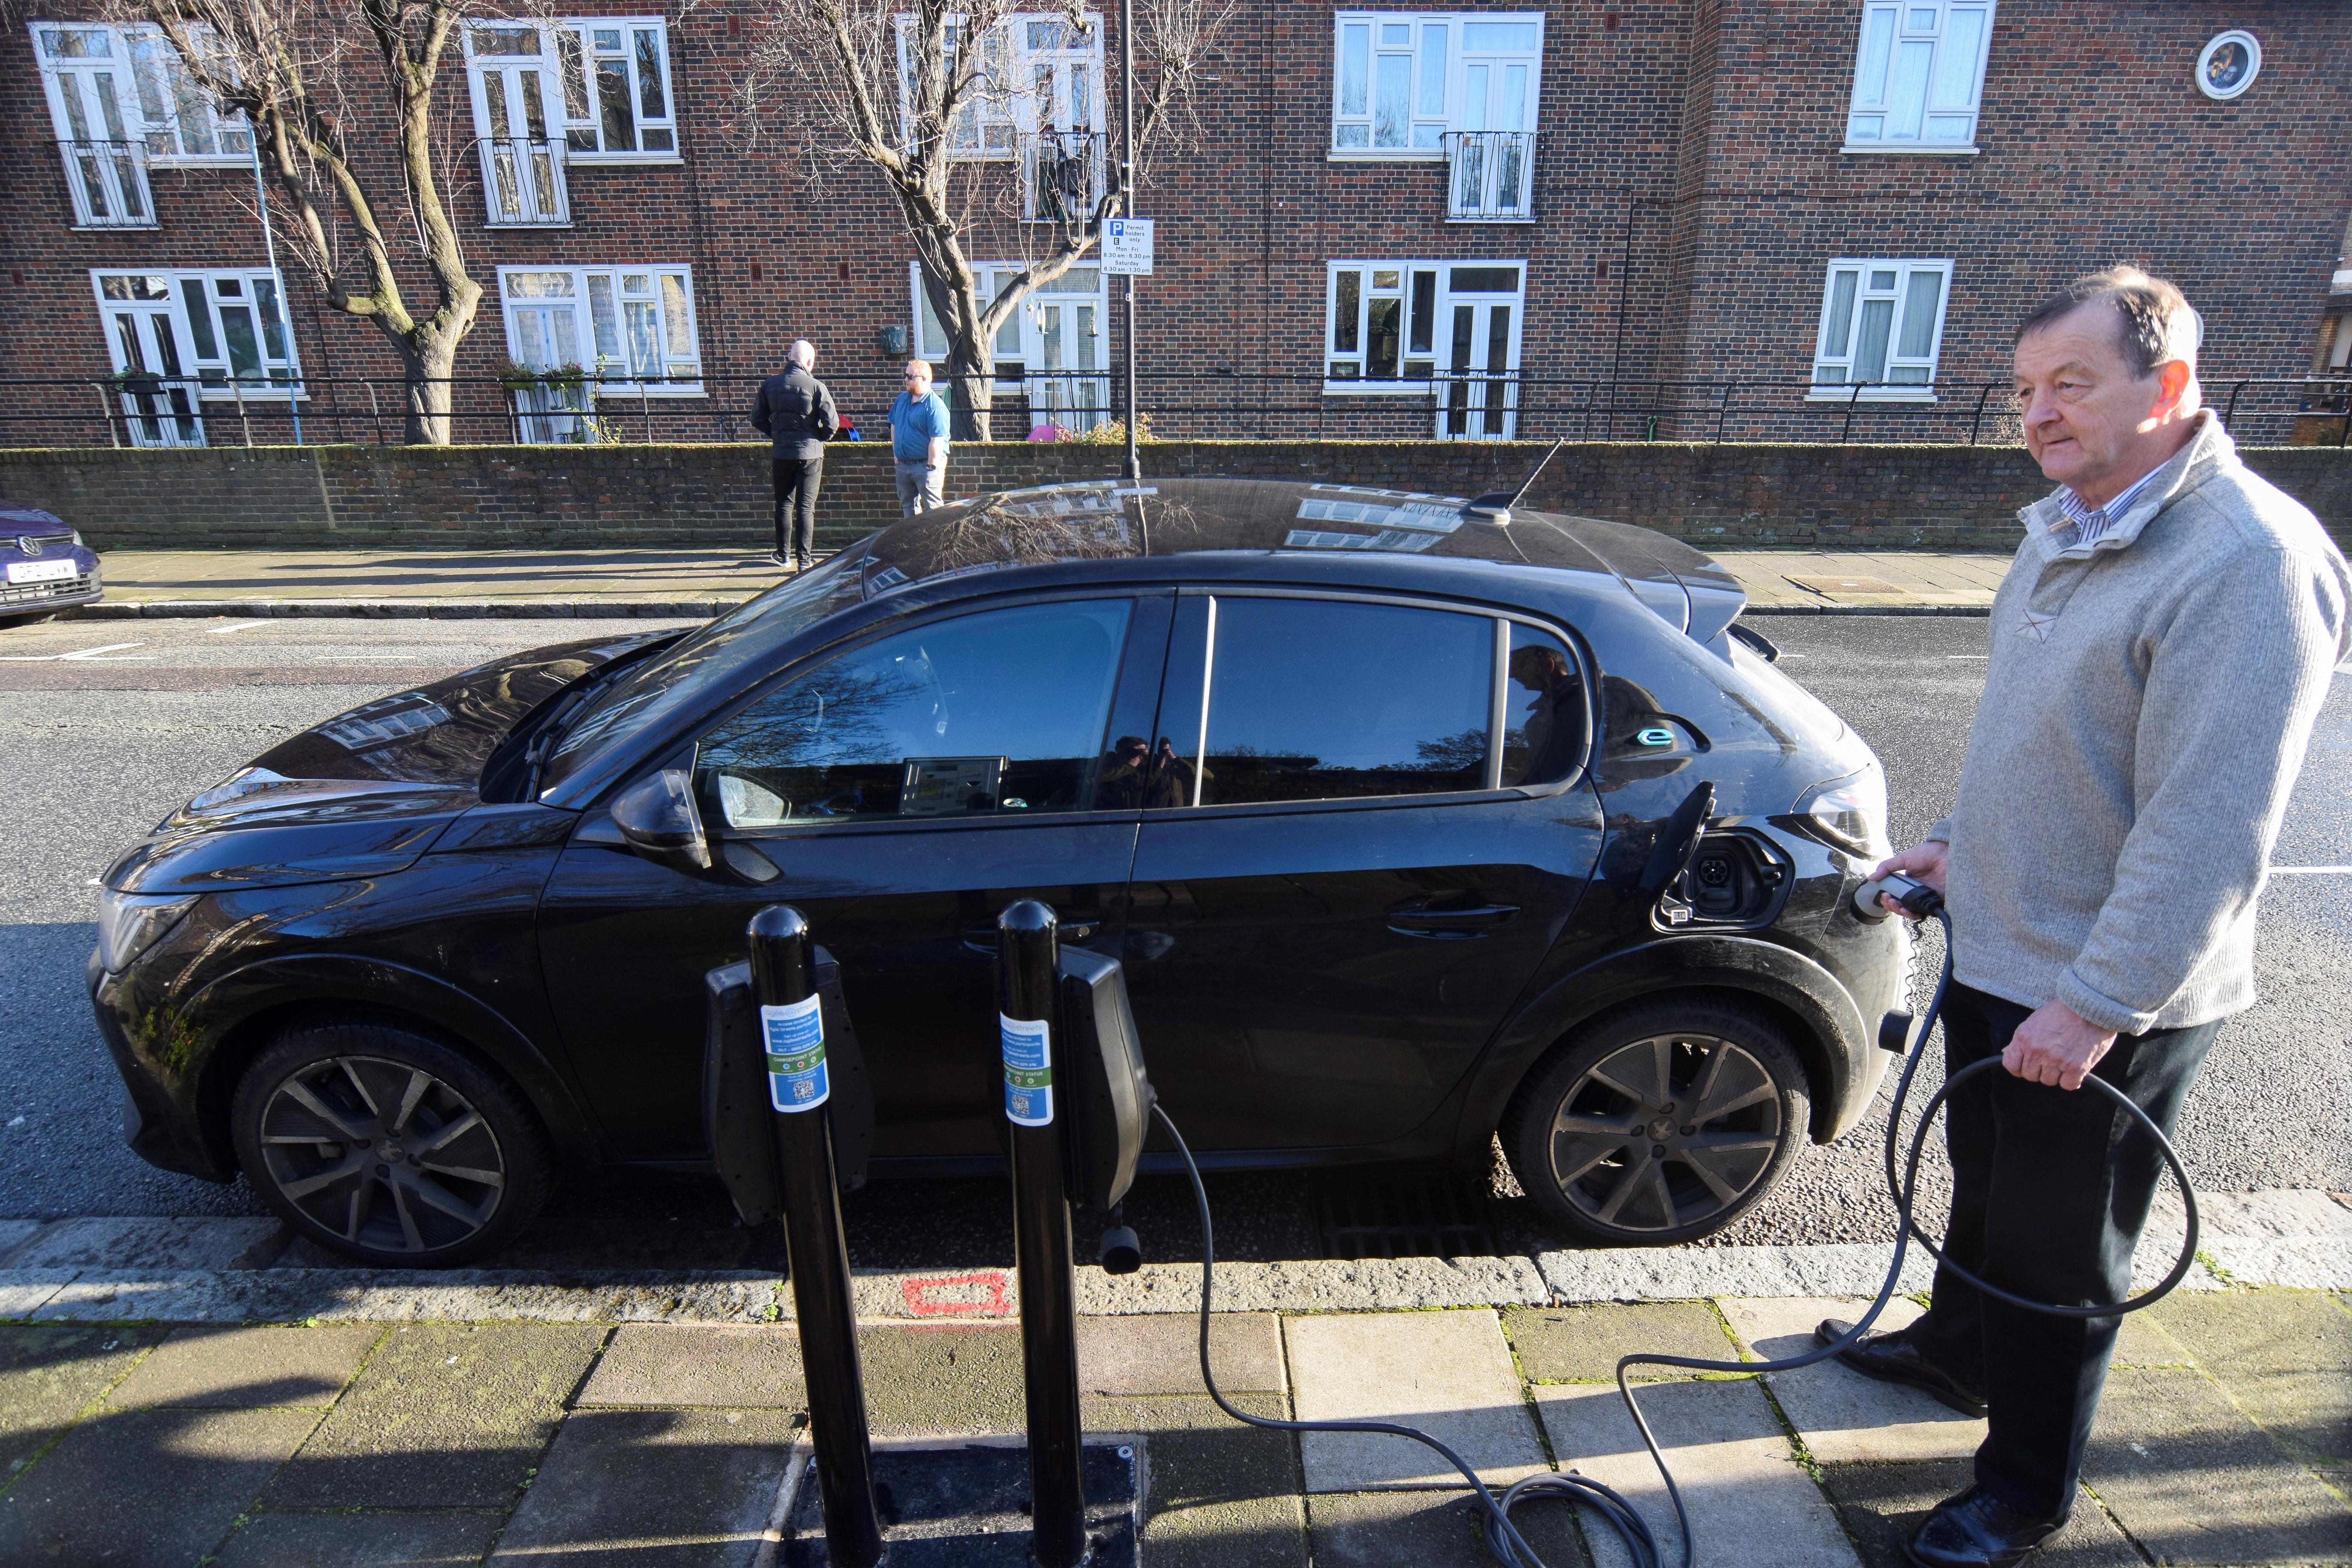 Connected Kerb customer Ged O'Sullivan plugs an electric vehicle into one of the charging infrastructure company's smart public on-street chargers in the borough of Hackney, London